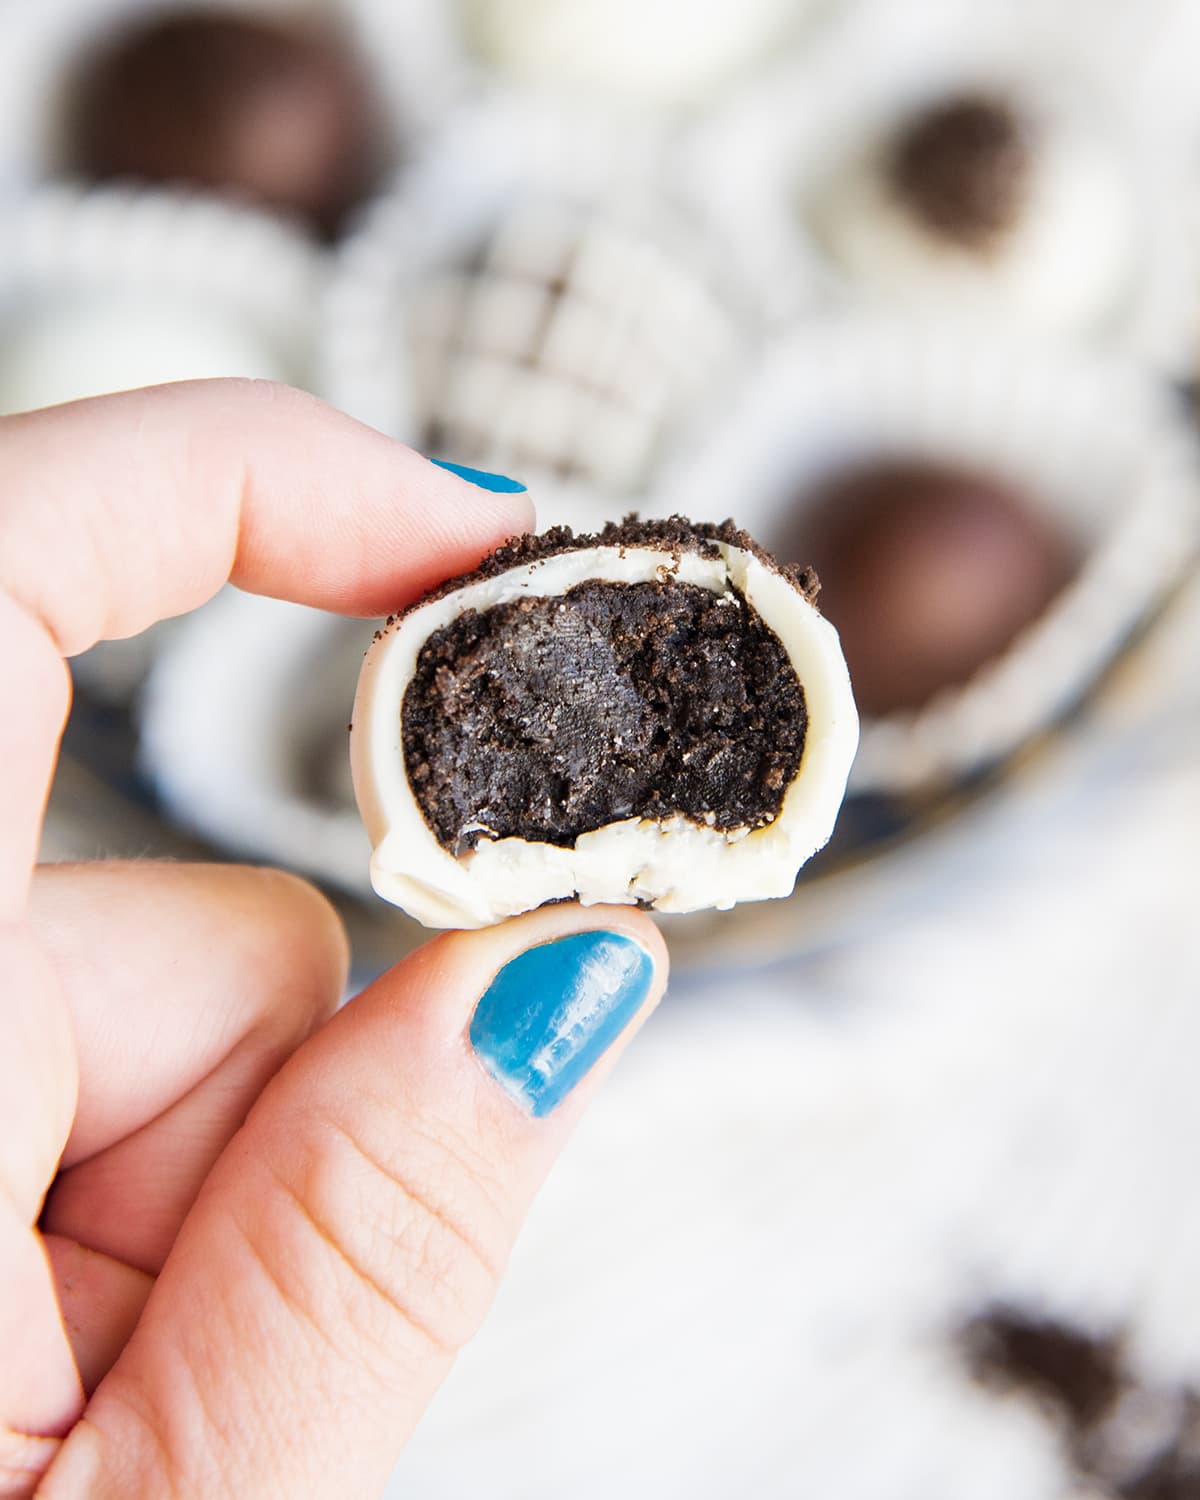 A hand holding a white chocolate Oreo ball with a bite out of it showing the Oreo center.